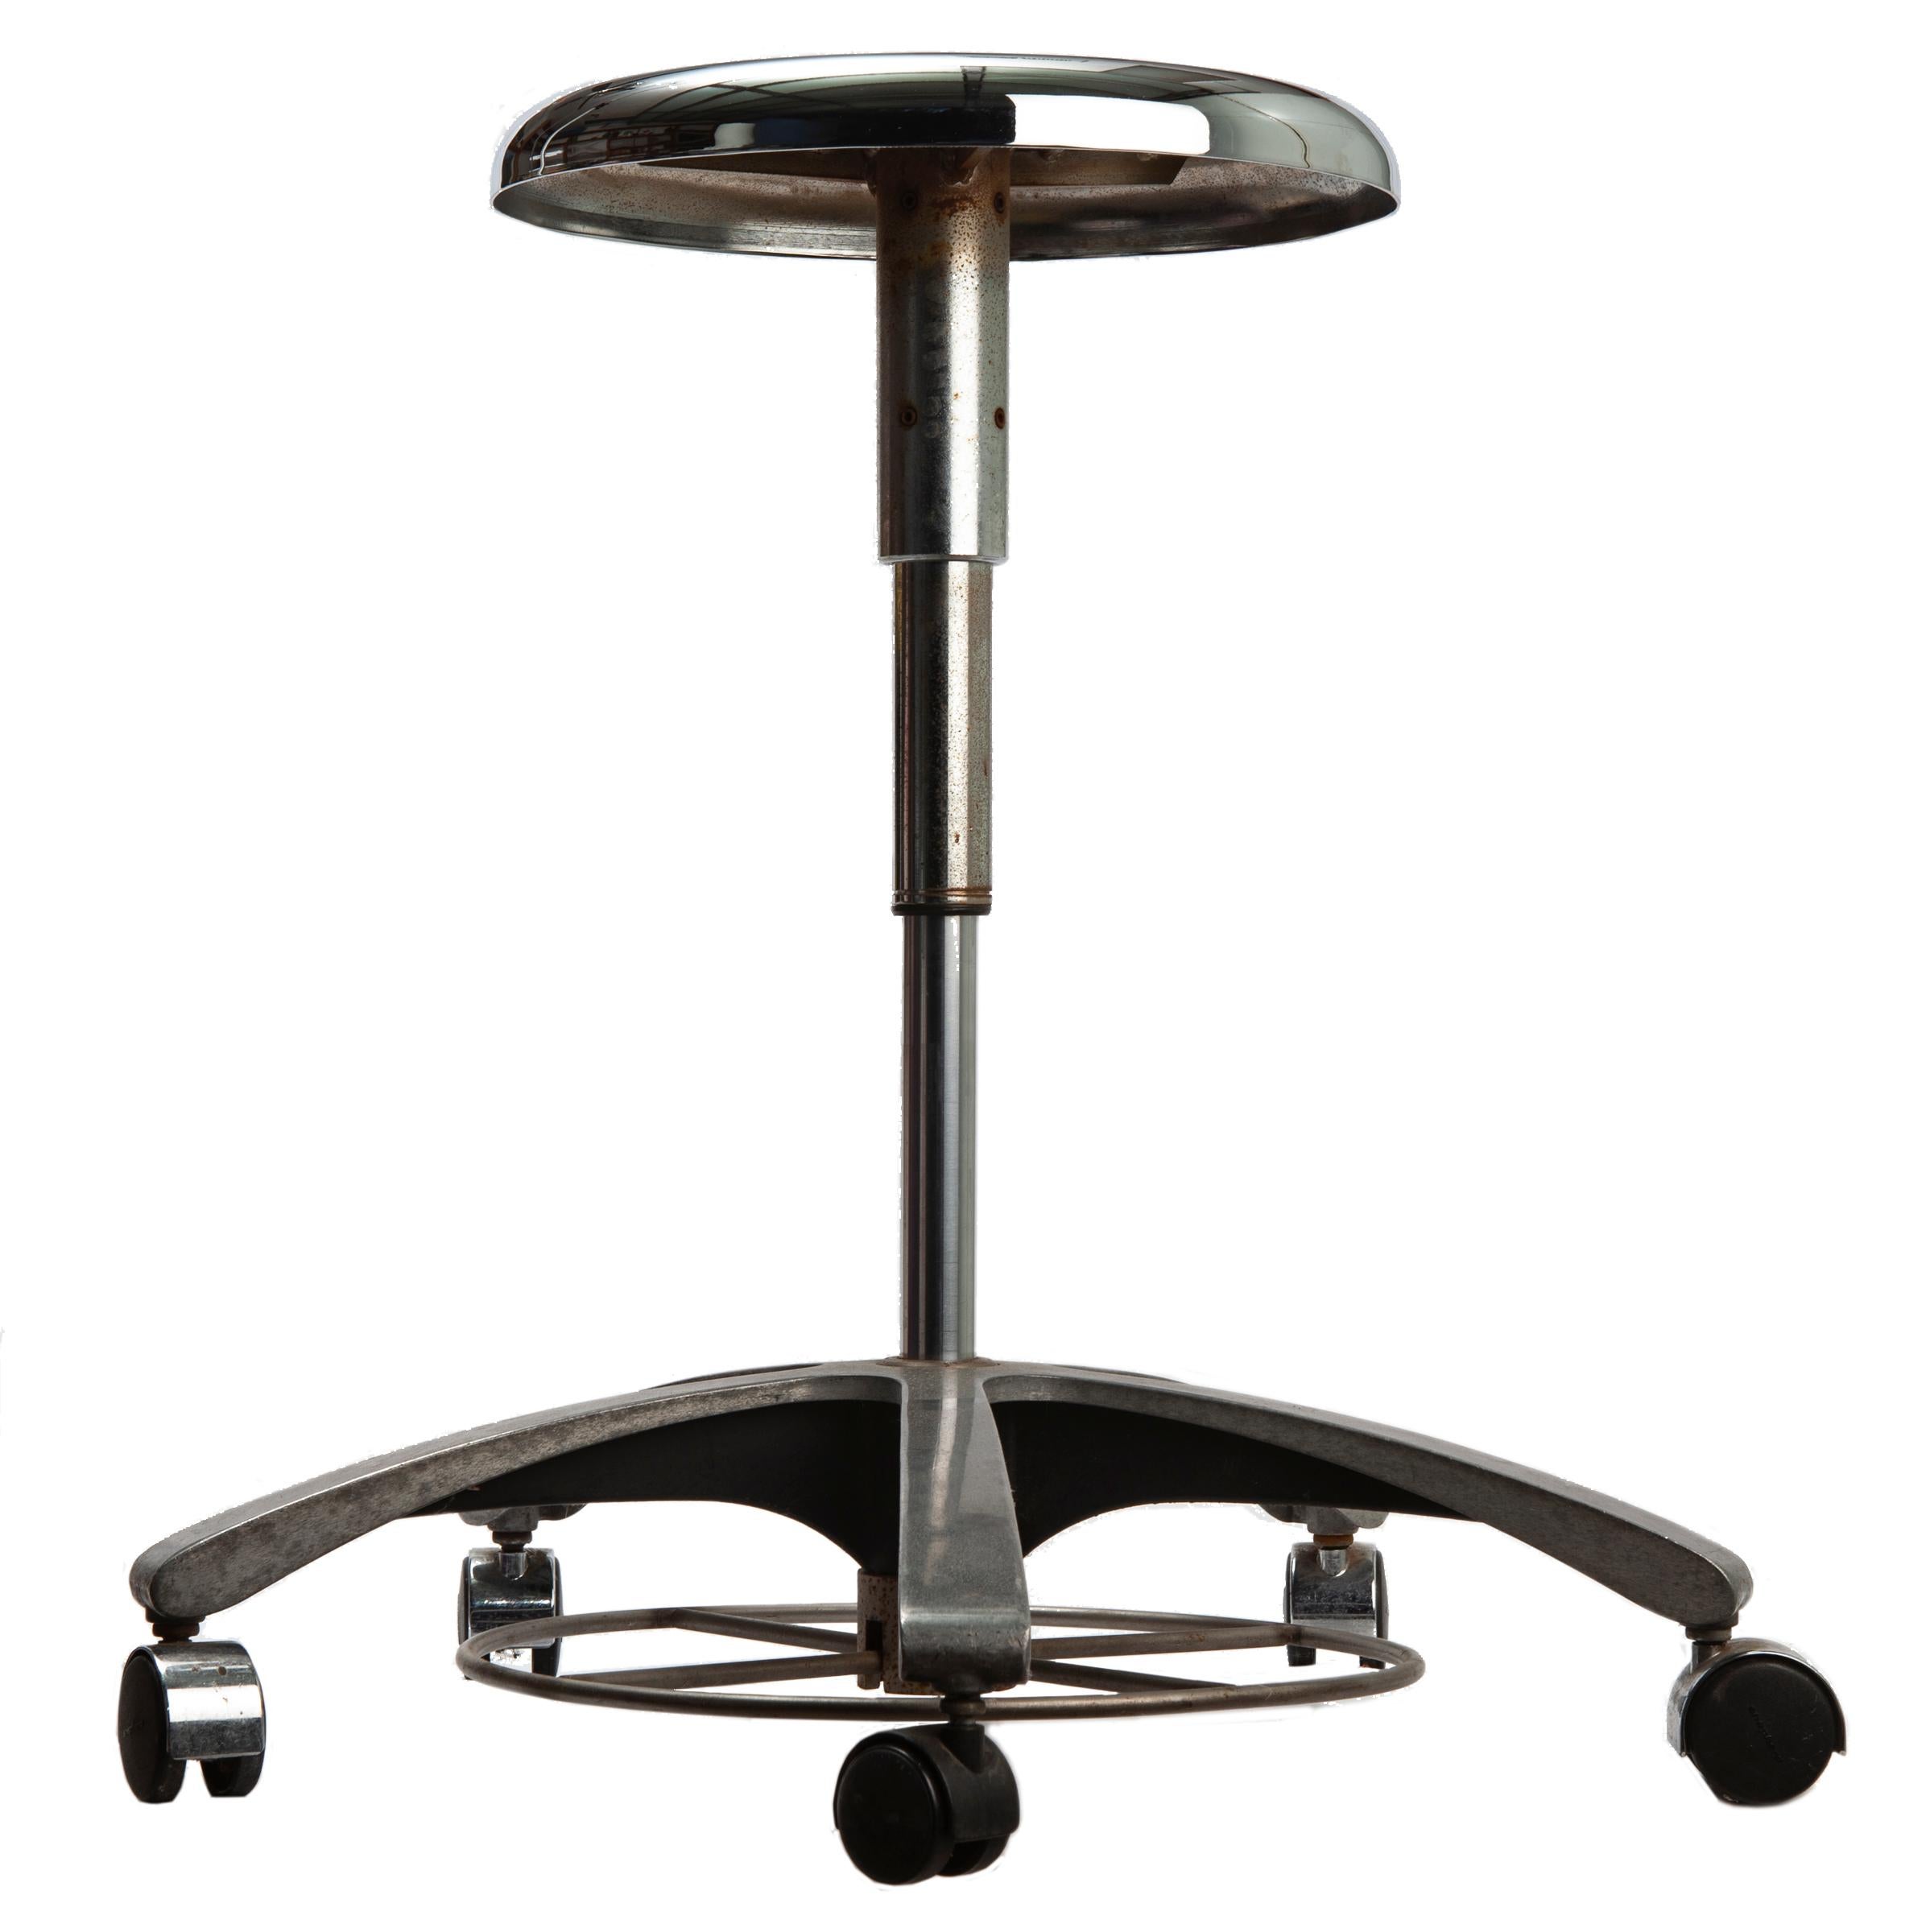 Mid century chrome medical/dental stool, effortlessly swivels around .
The wheels are made of a resin material, the stretcher are made of chrome. 
A great piece for small spaces, easily tucks away. Original wheels/castors.